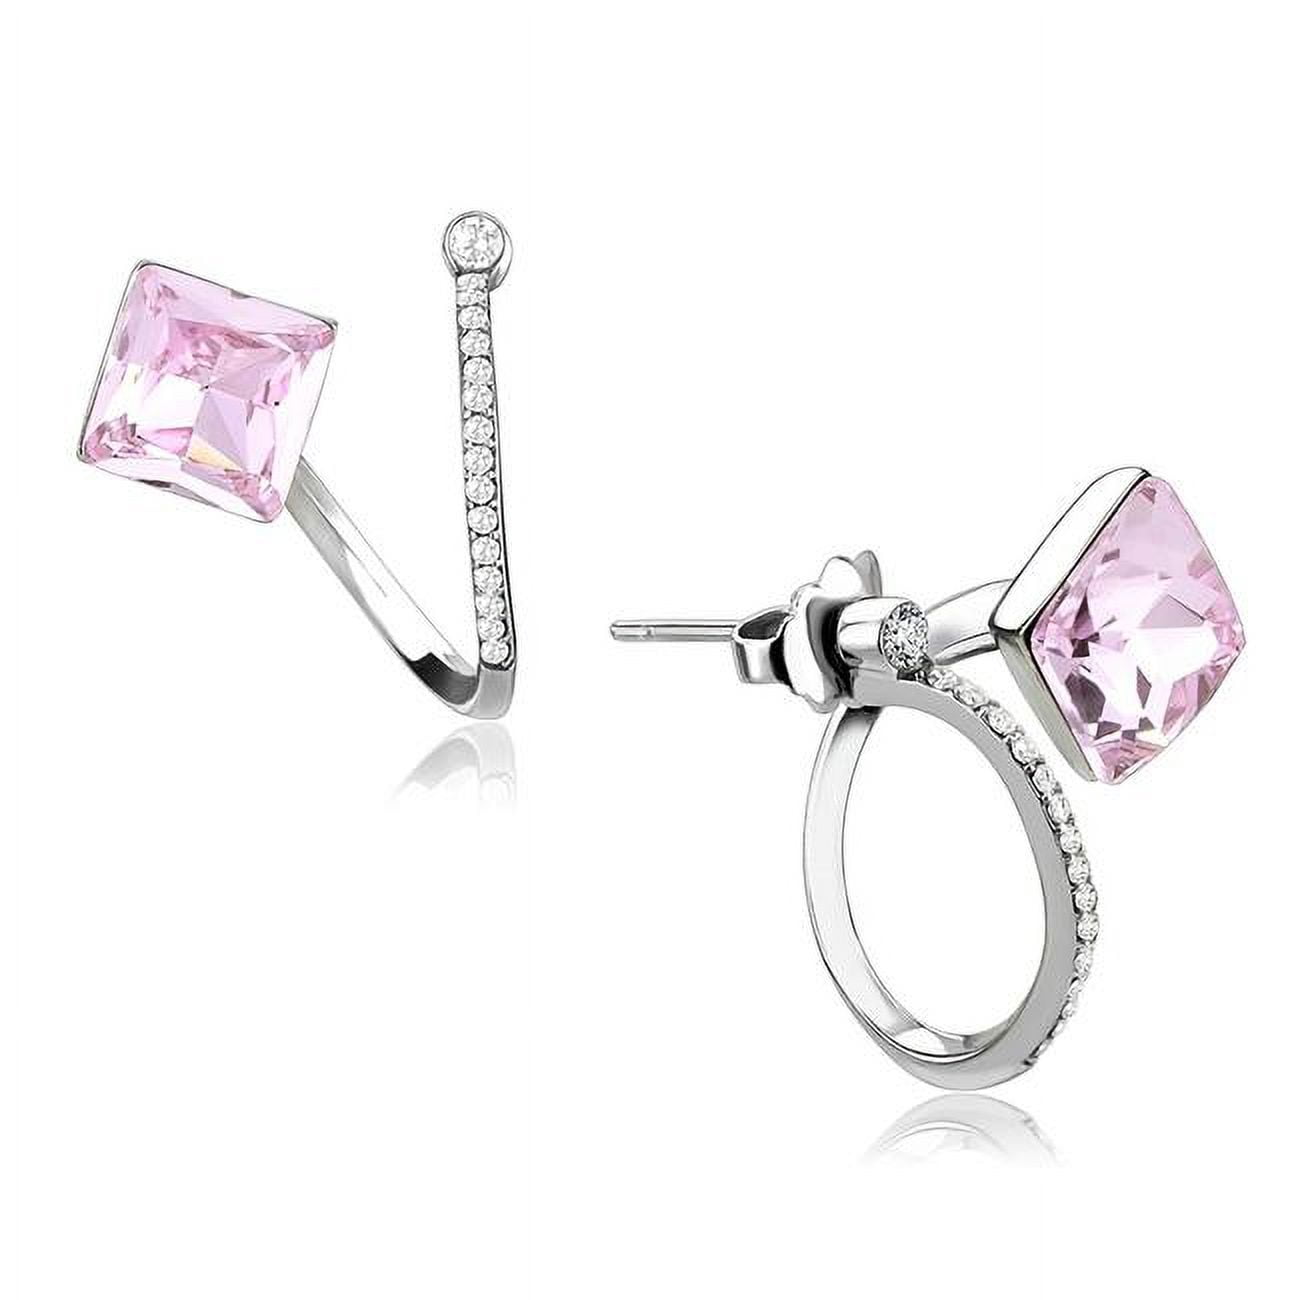 Picture of Alamode DA377 Women High Polished Stainless Steel Earrings with Top Grade Crystal in Light Rose